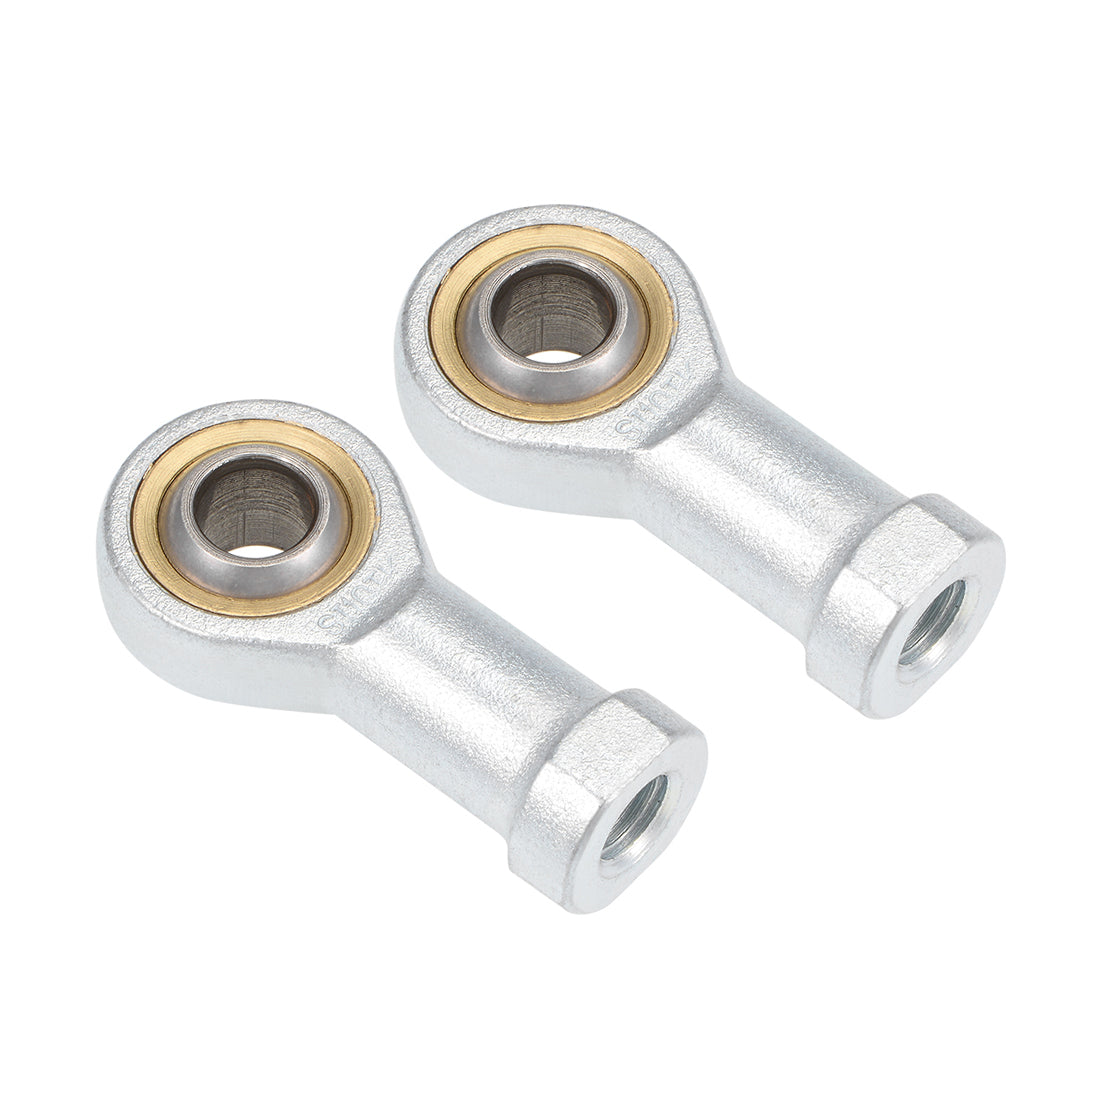 uxcell Uxcell 10mm Rod End Bearing M10x1.5mm Rod Ends Ball Joint Female Right Hand Thread 2pcs